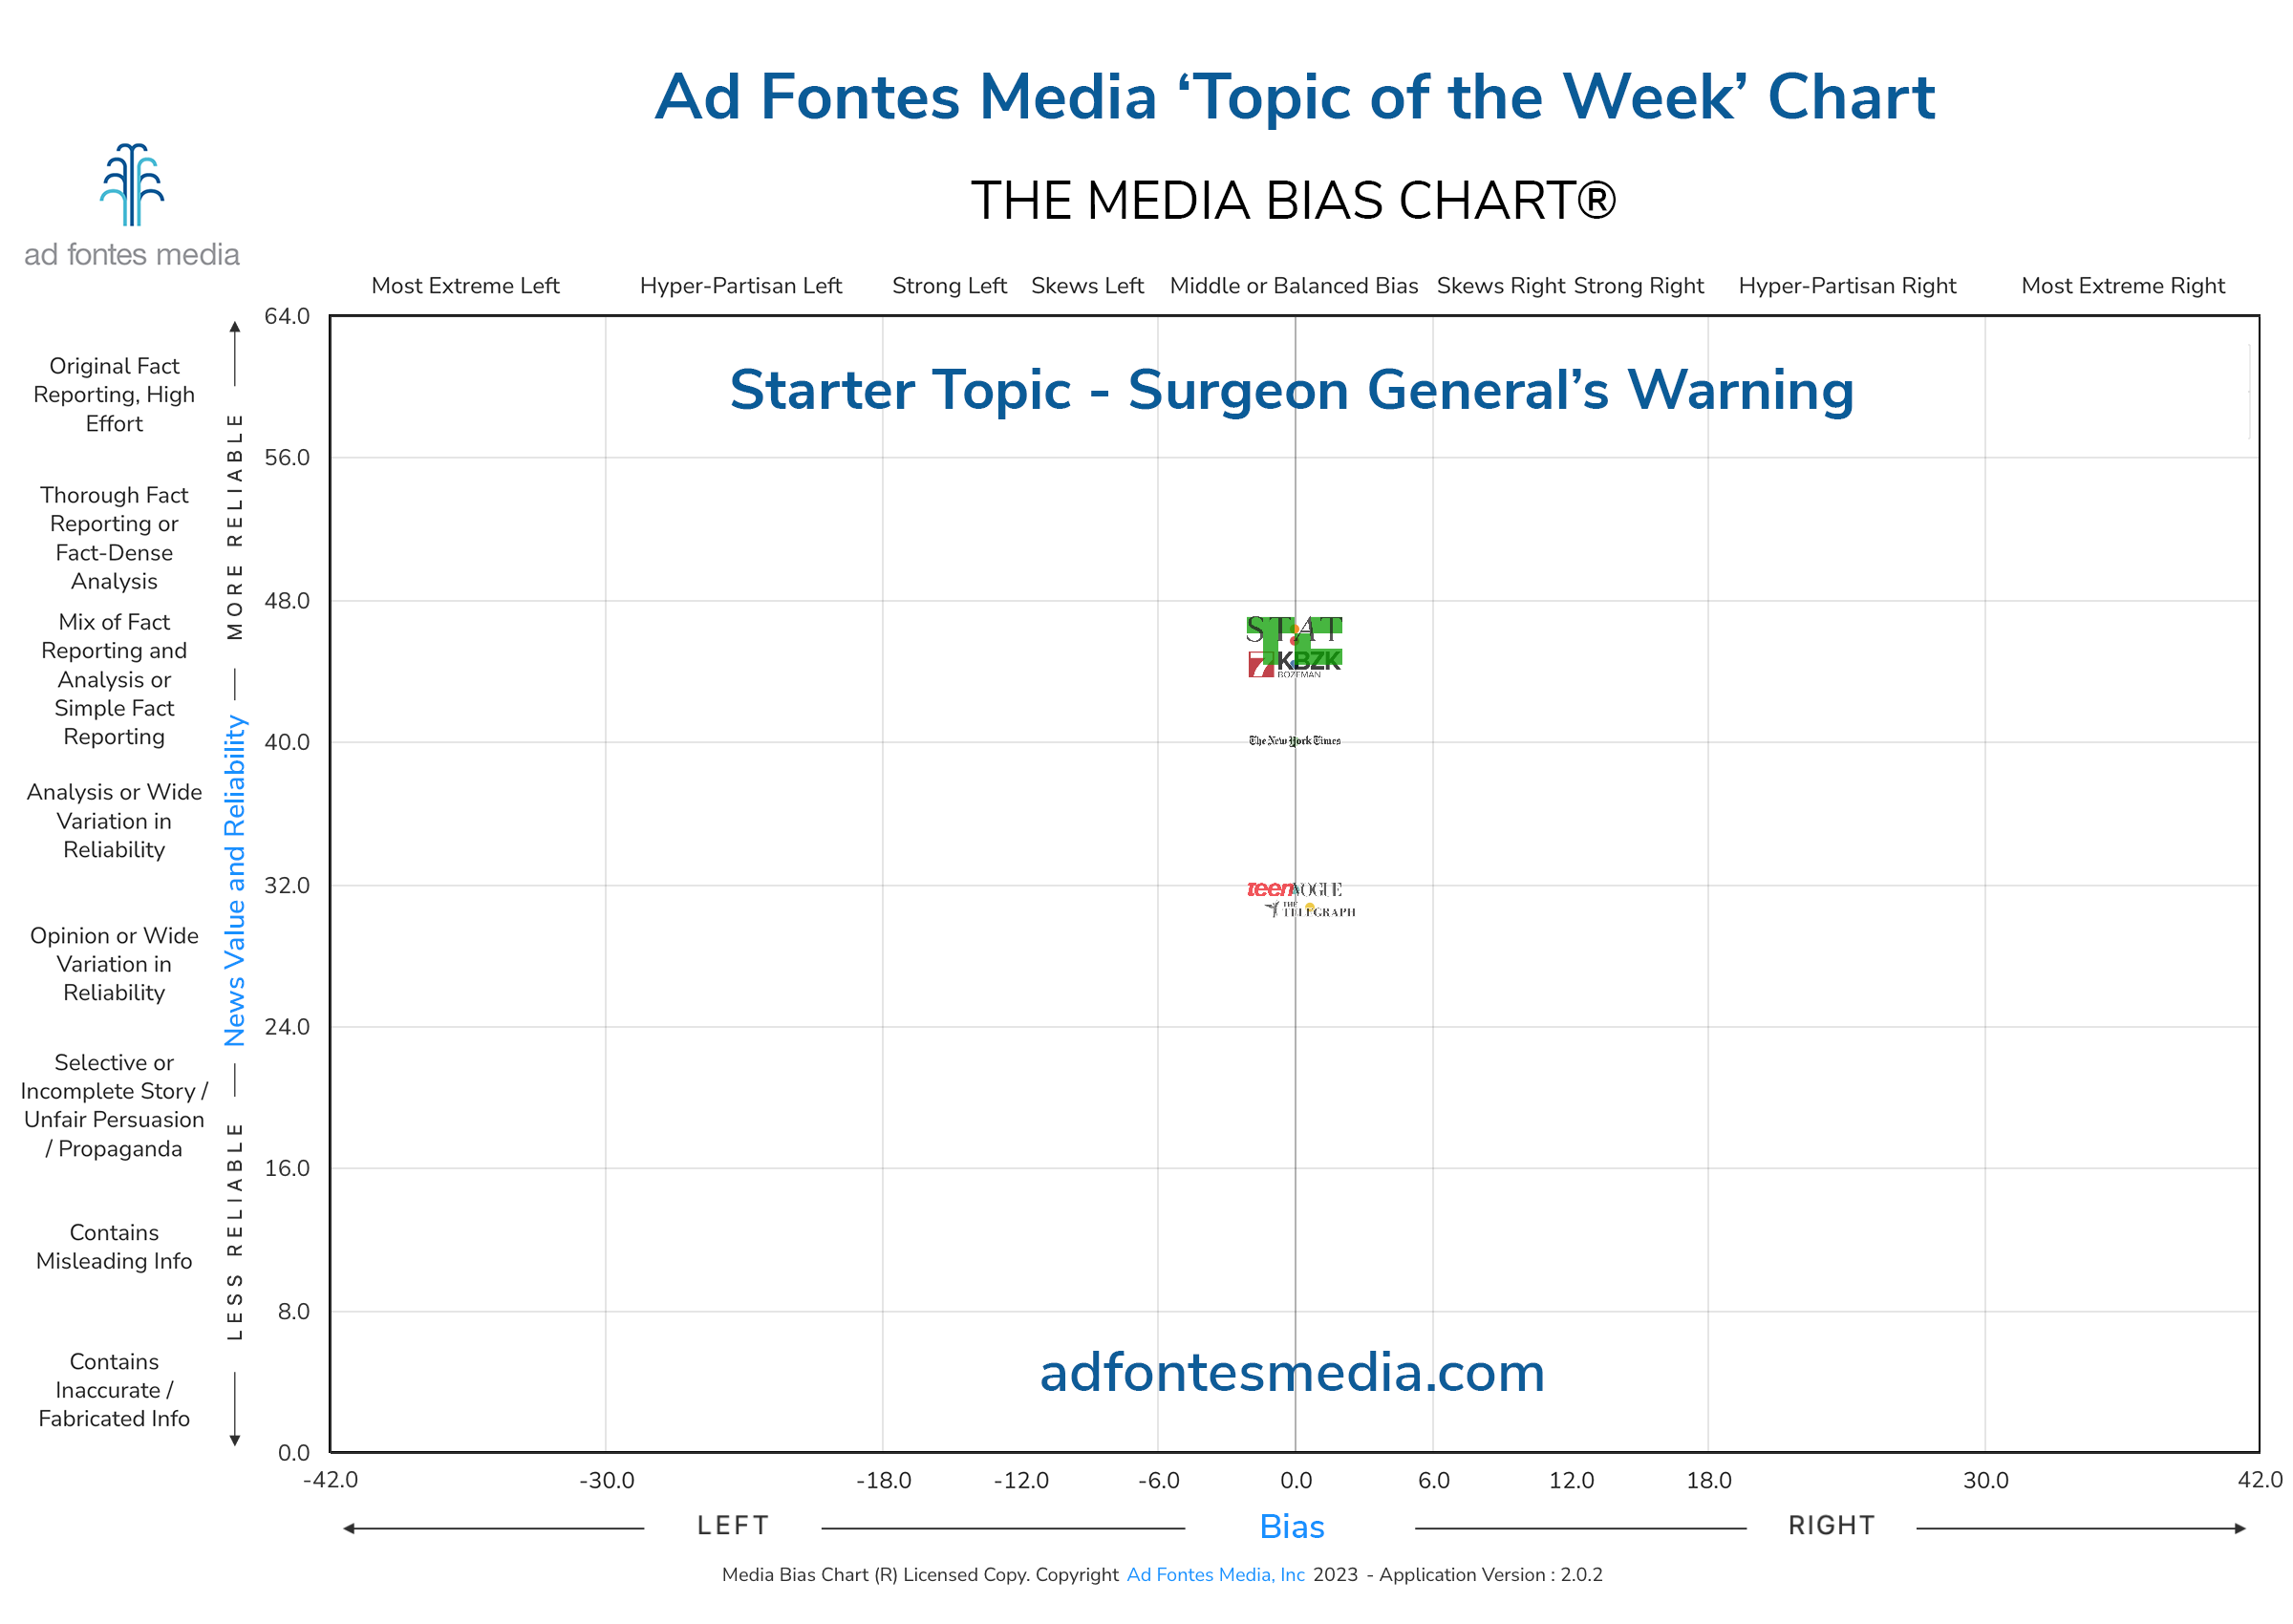 Scores of the Surgeon General’s Warning articles on the chart